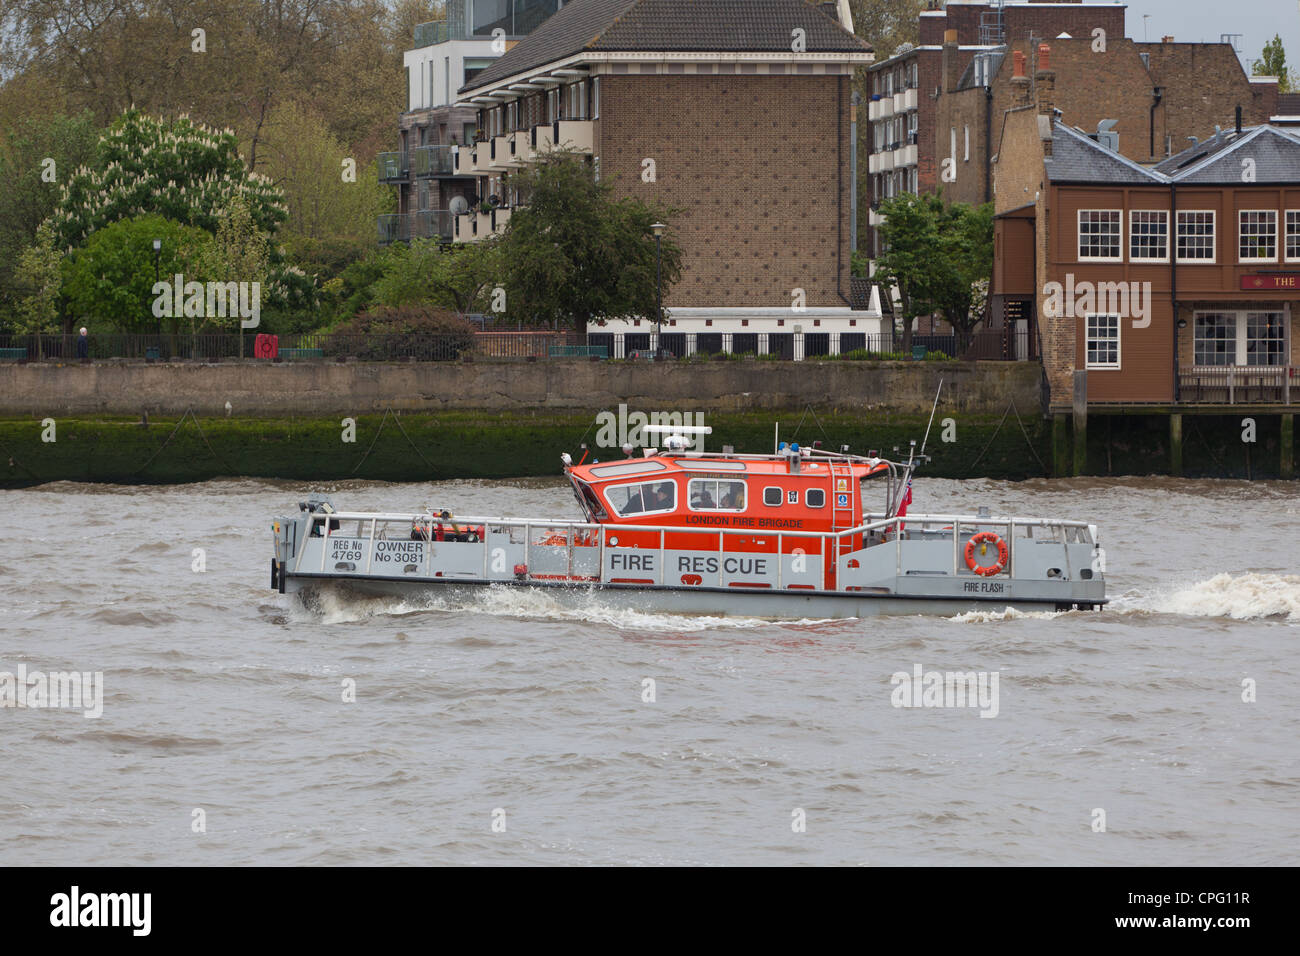 London Fire Brigade rescue boat patrolling on the River Thames, London Stock Photo